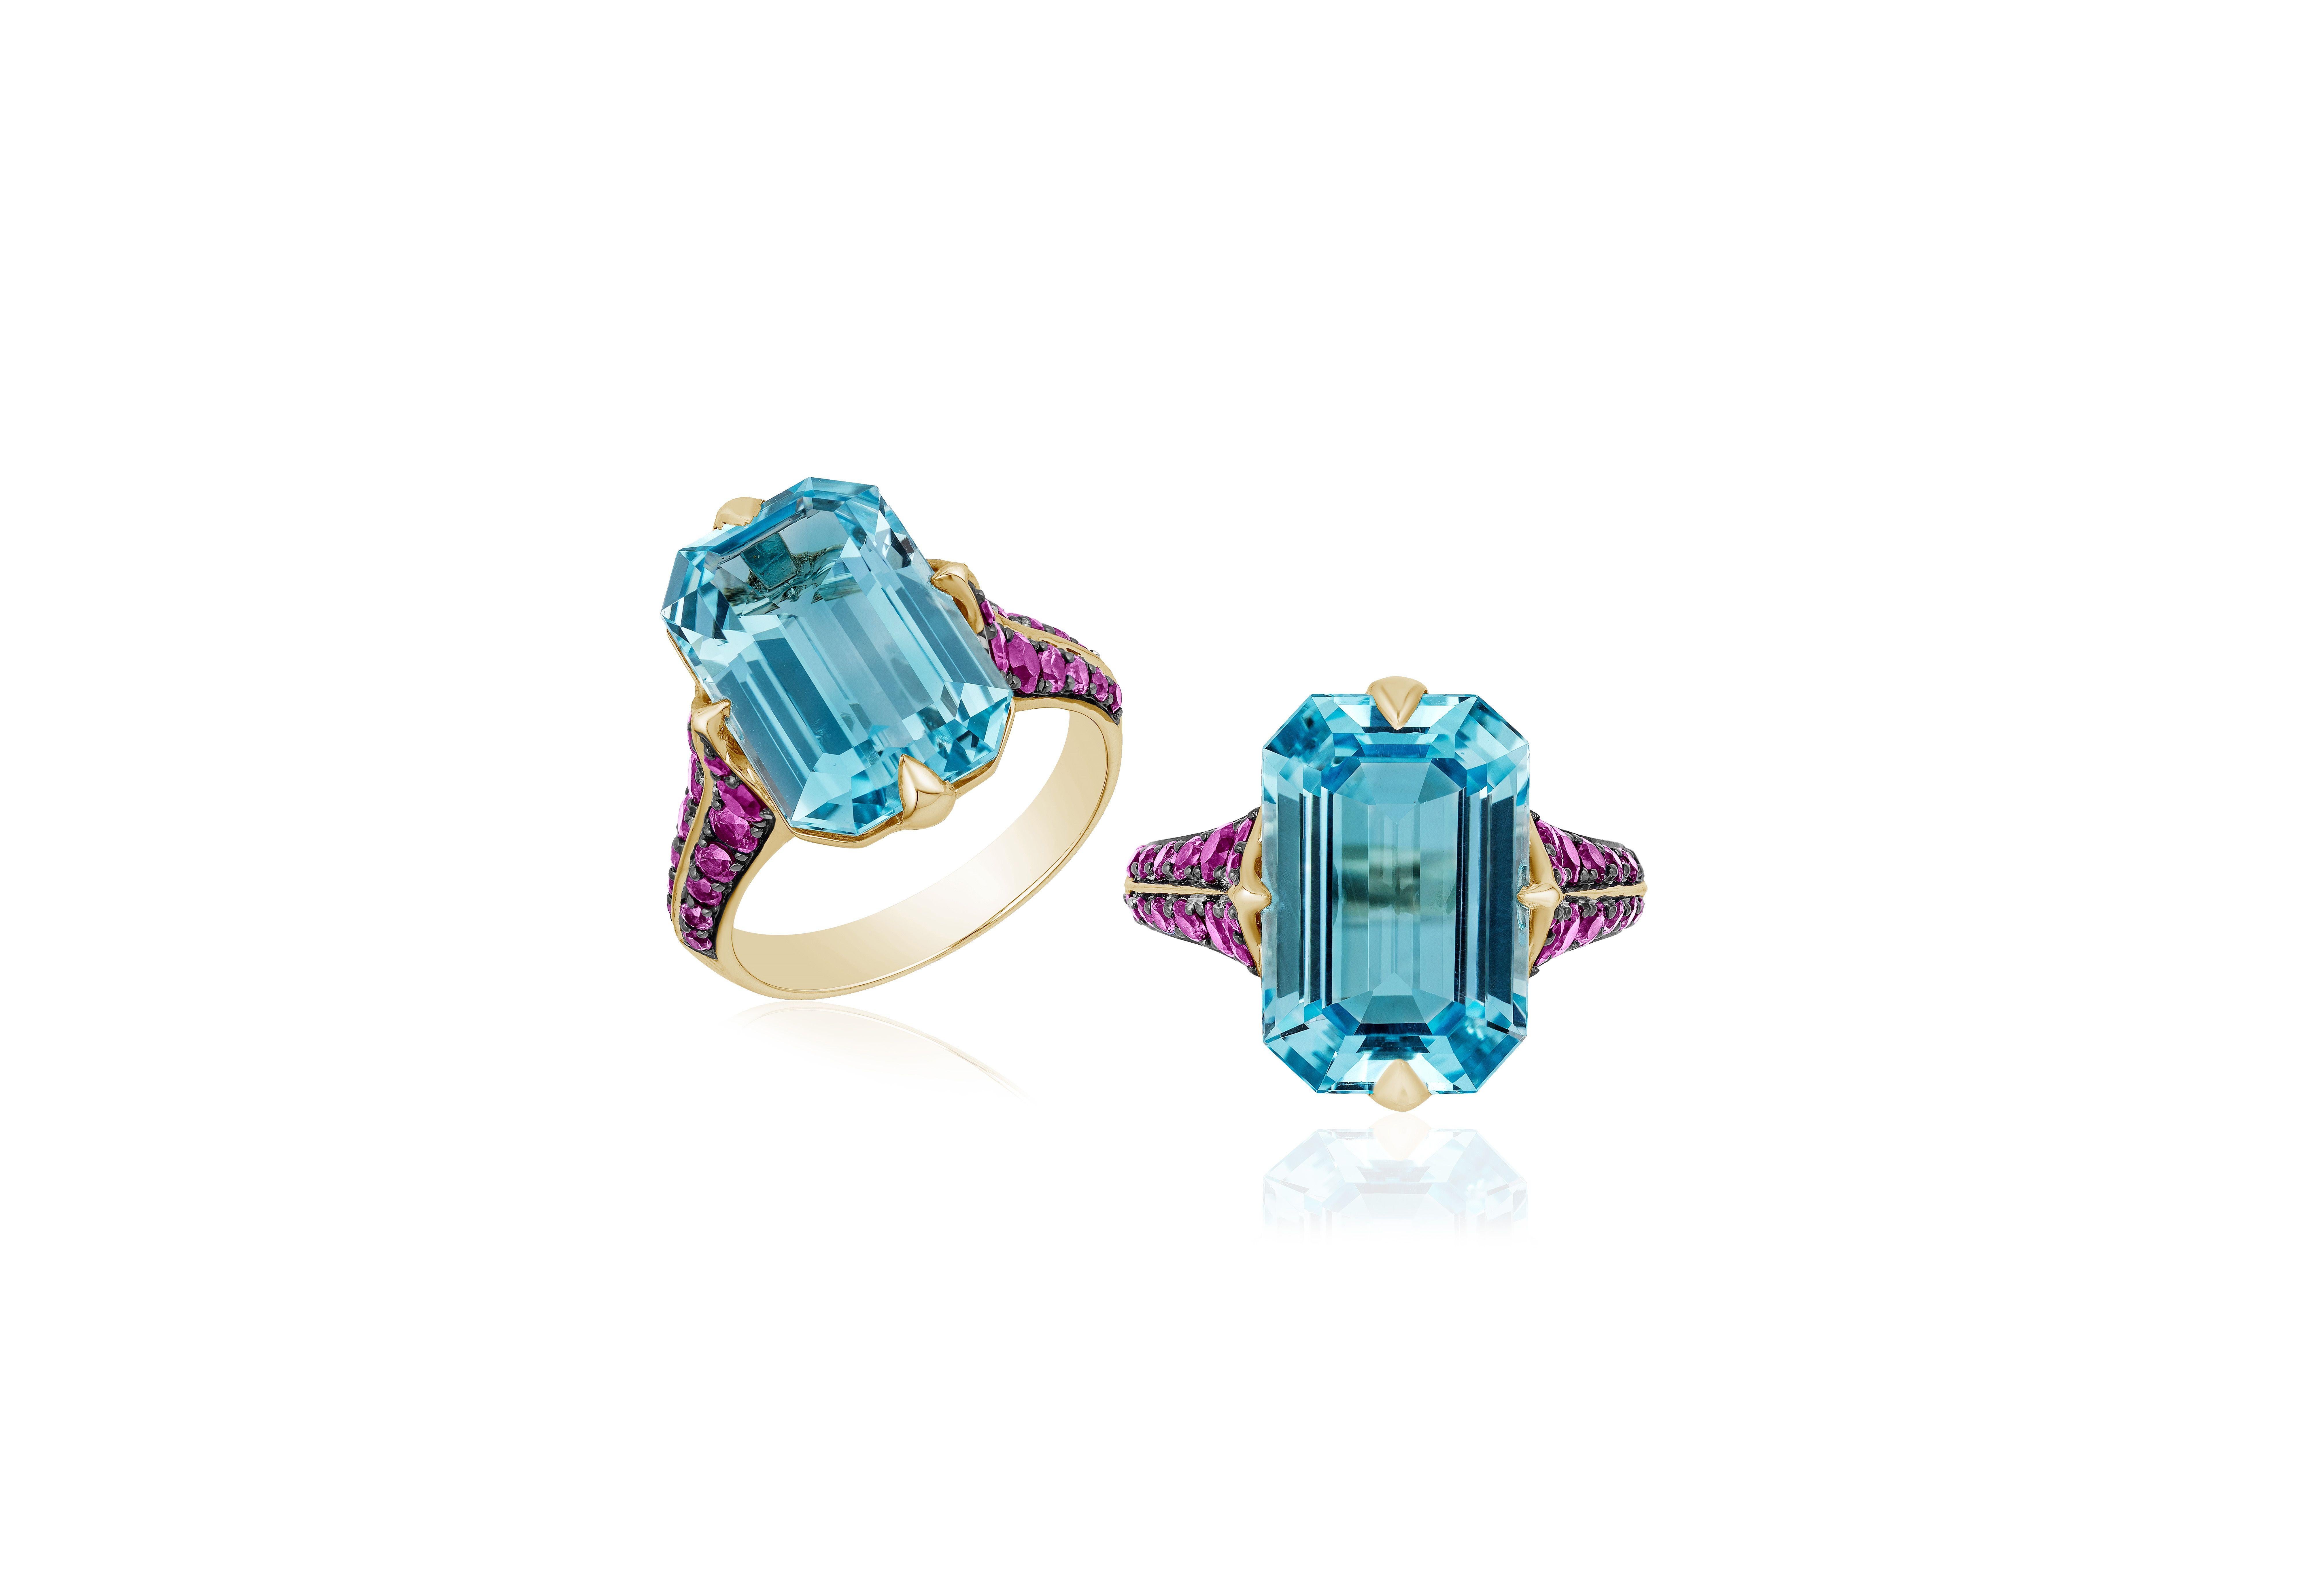 Blue Topaz and Pink Sapphire Ring in 18K Yellow Gold and Light Black Rhodium, from 'Rain-Forest' Collection
 Stone Size: 15 x 10 mm
 Gemstone Approx. Wt: Blue Topaz- 9.44 Carats
 Pink Sapphire- 0.88 Carats